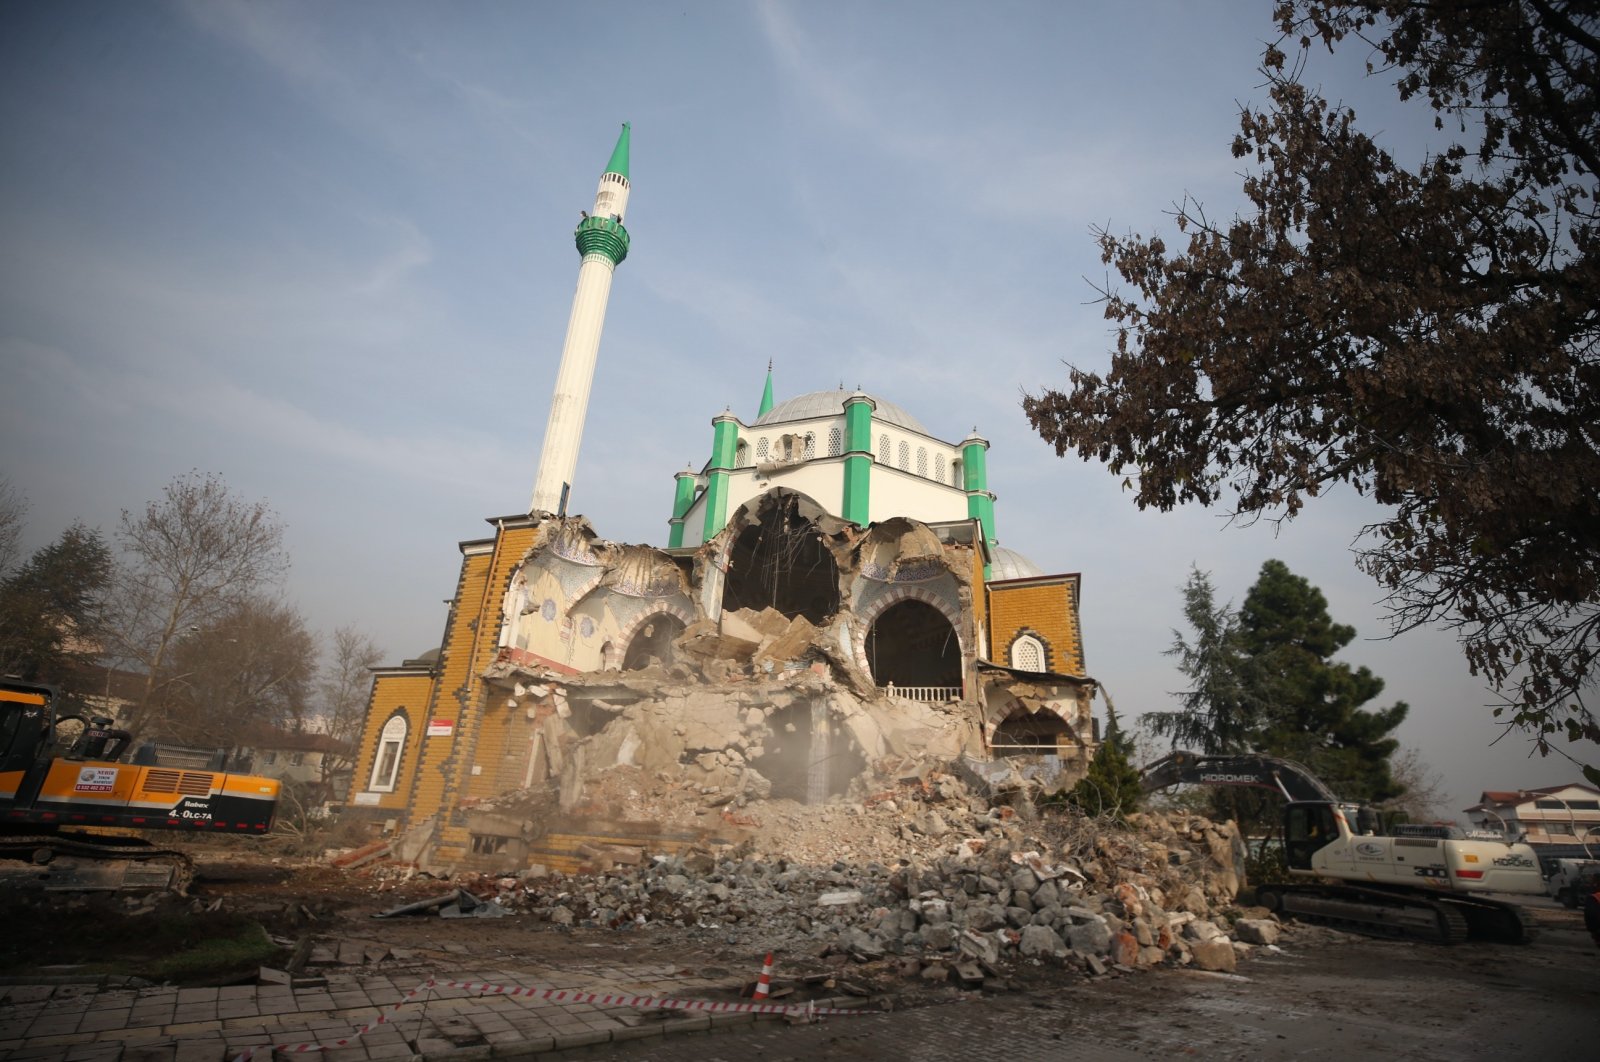 The Çilimli Central Mosque, which was heavily damaged in the 5.9 magnitude earthquake that occurred in Düzce on Nov. 23, has been demolished. (AA Photo)